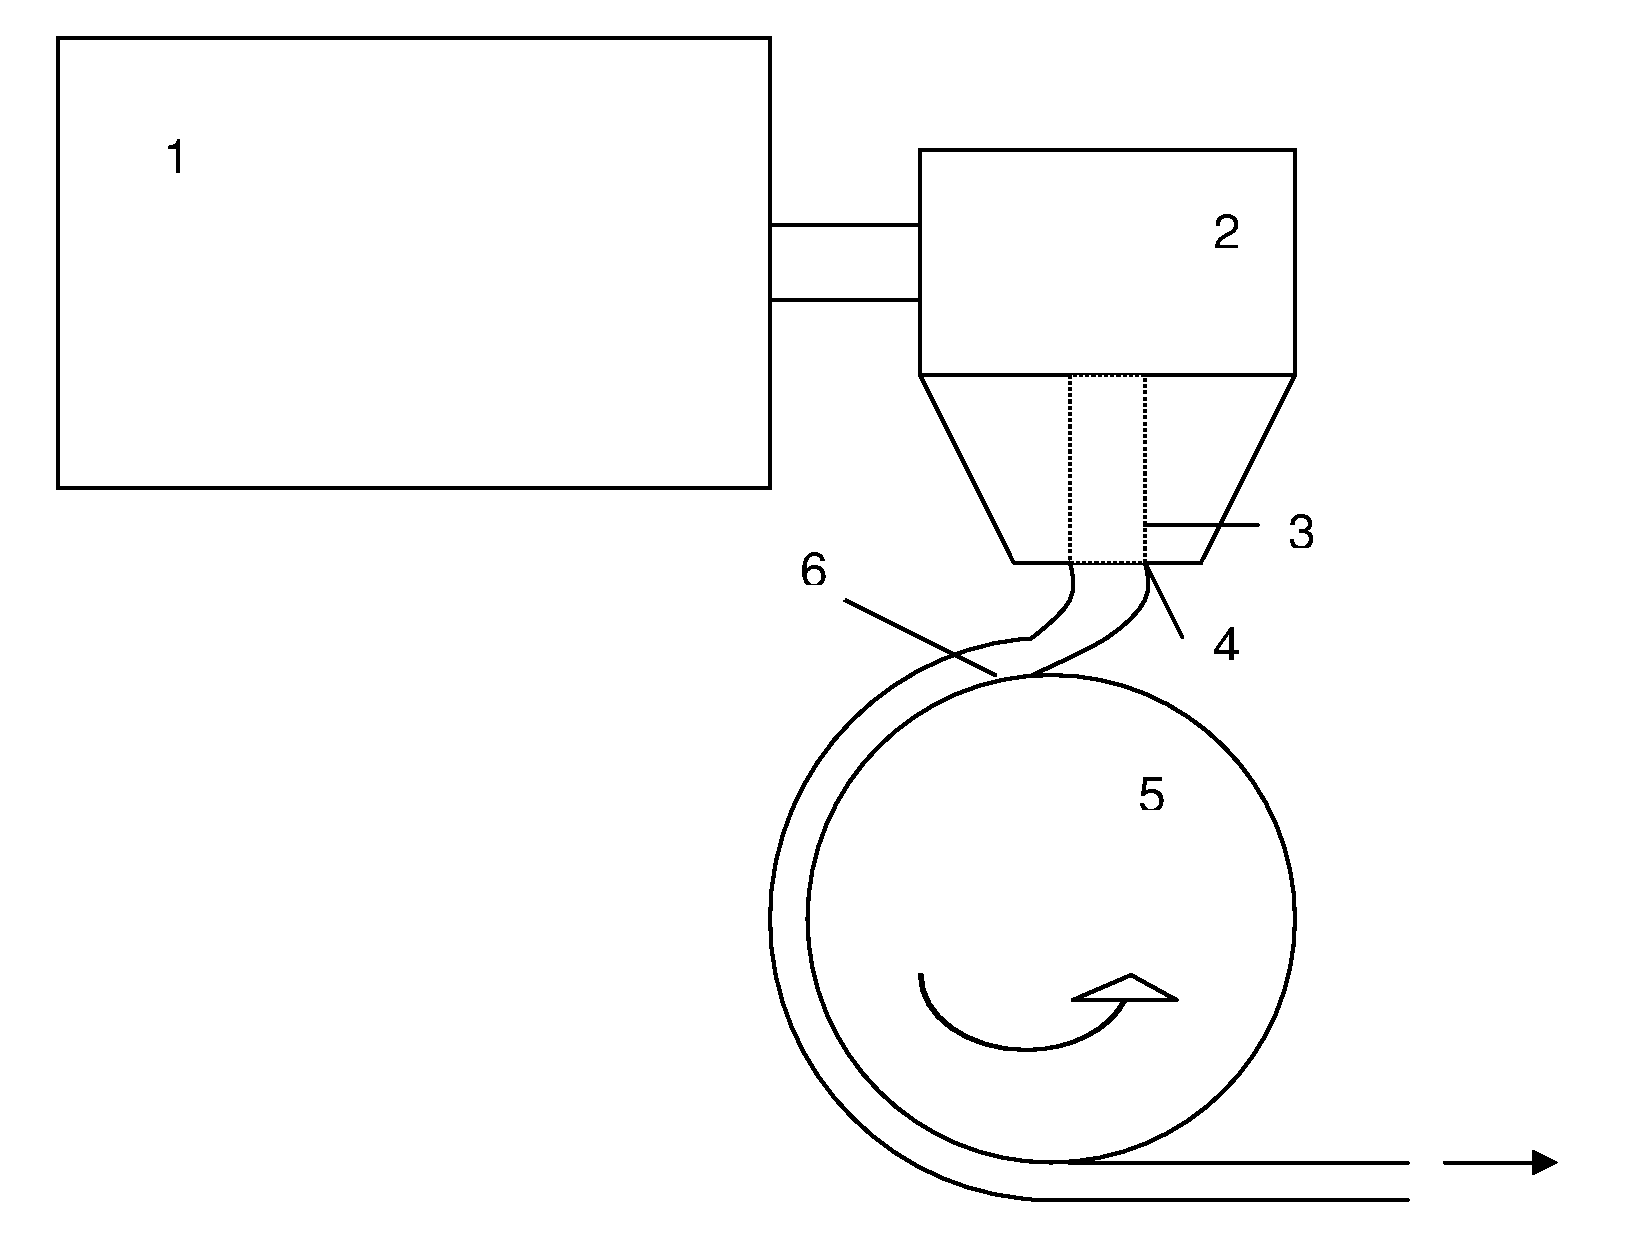 Cellulose Ester Compositions Having Low Bifringence and Films Made Therefrom Comprising a Plasticizer